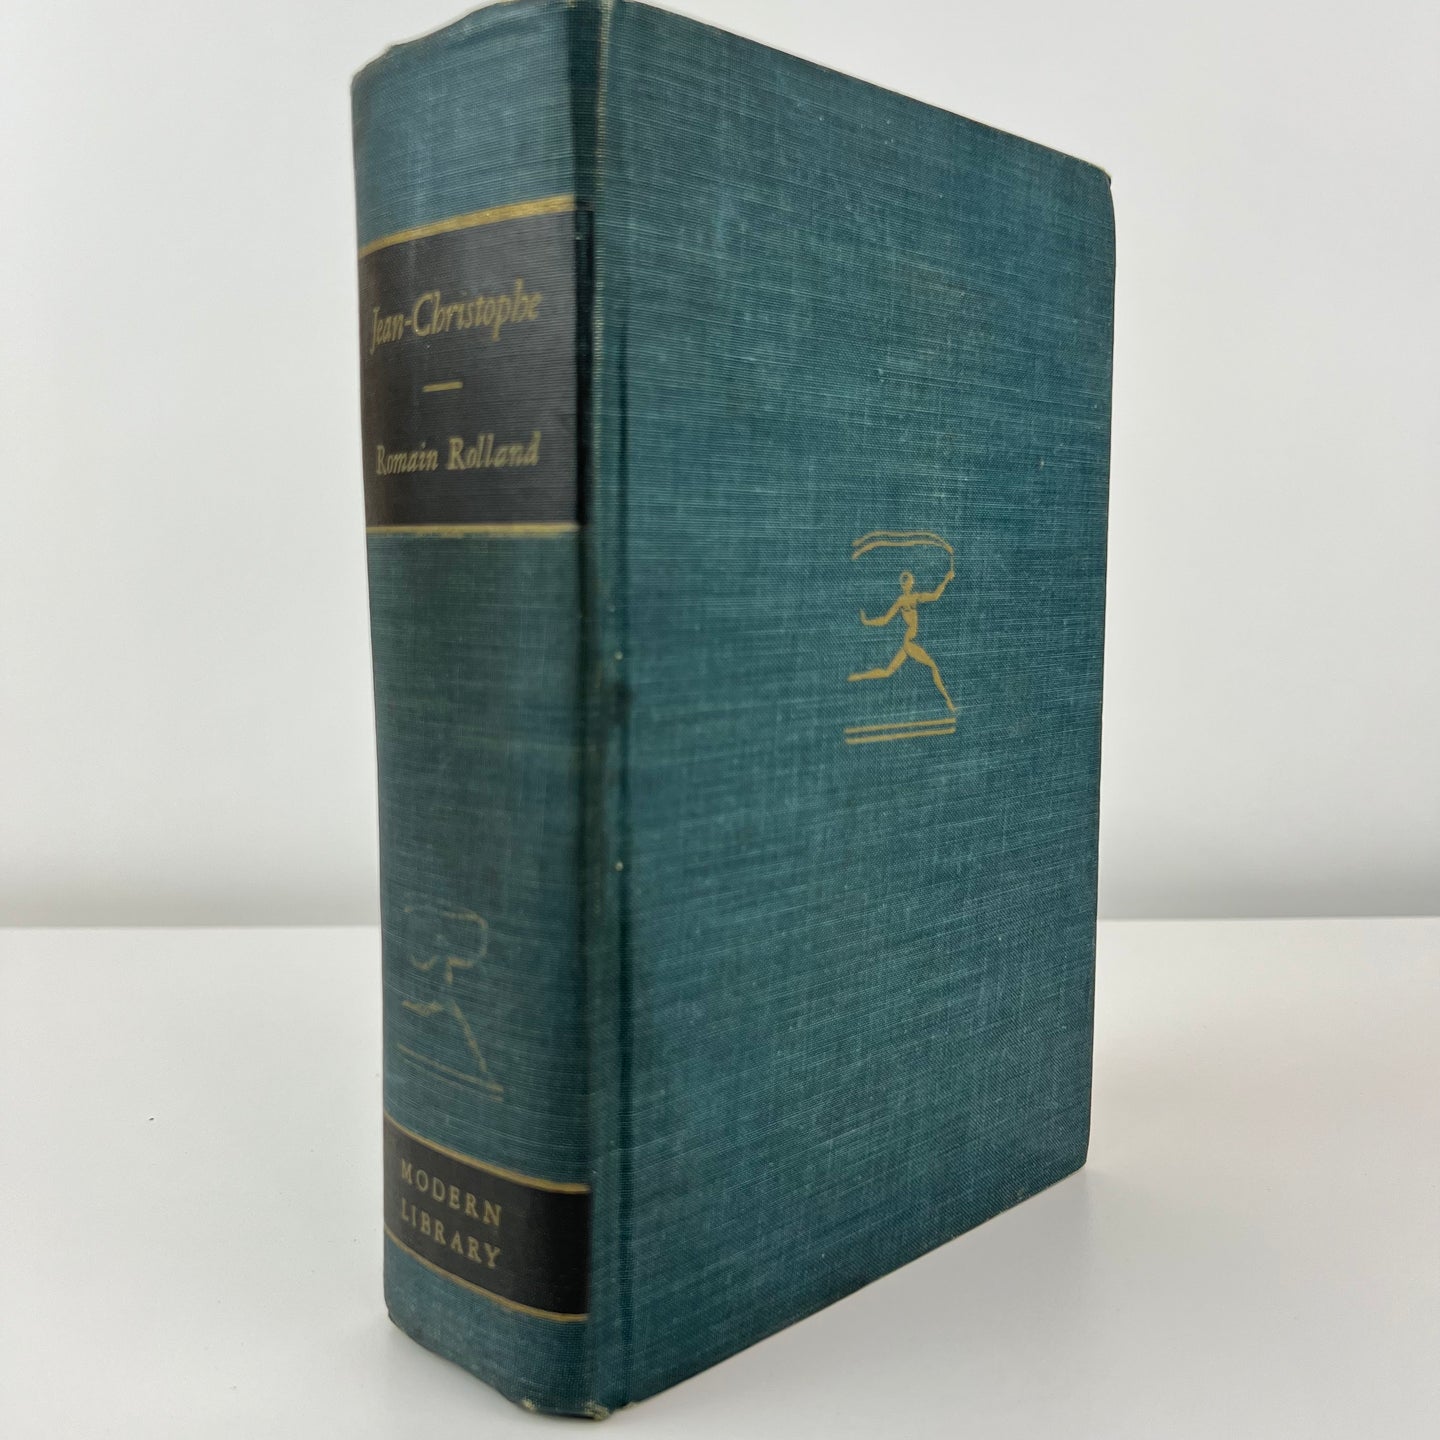 Jean Christophe by Romain Rolland Hardcover Copyright 1913